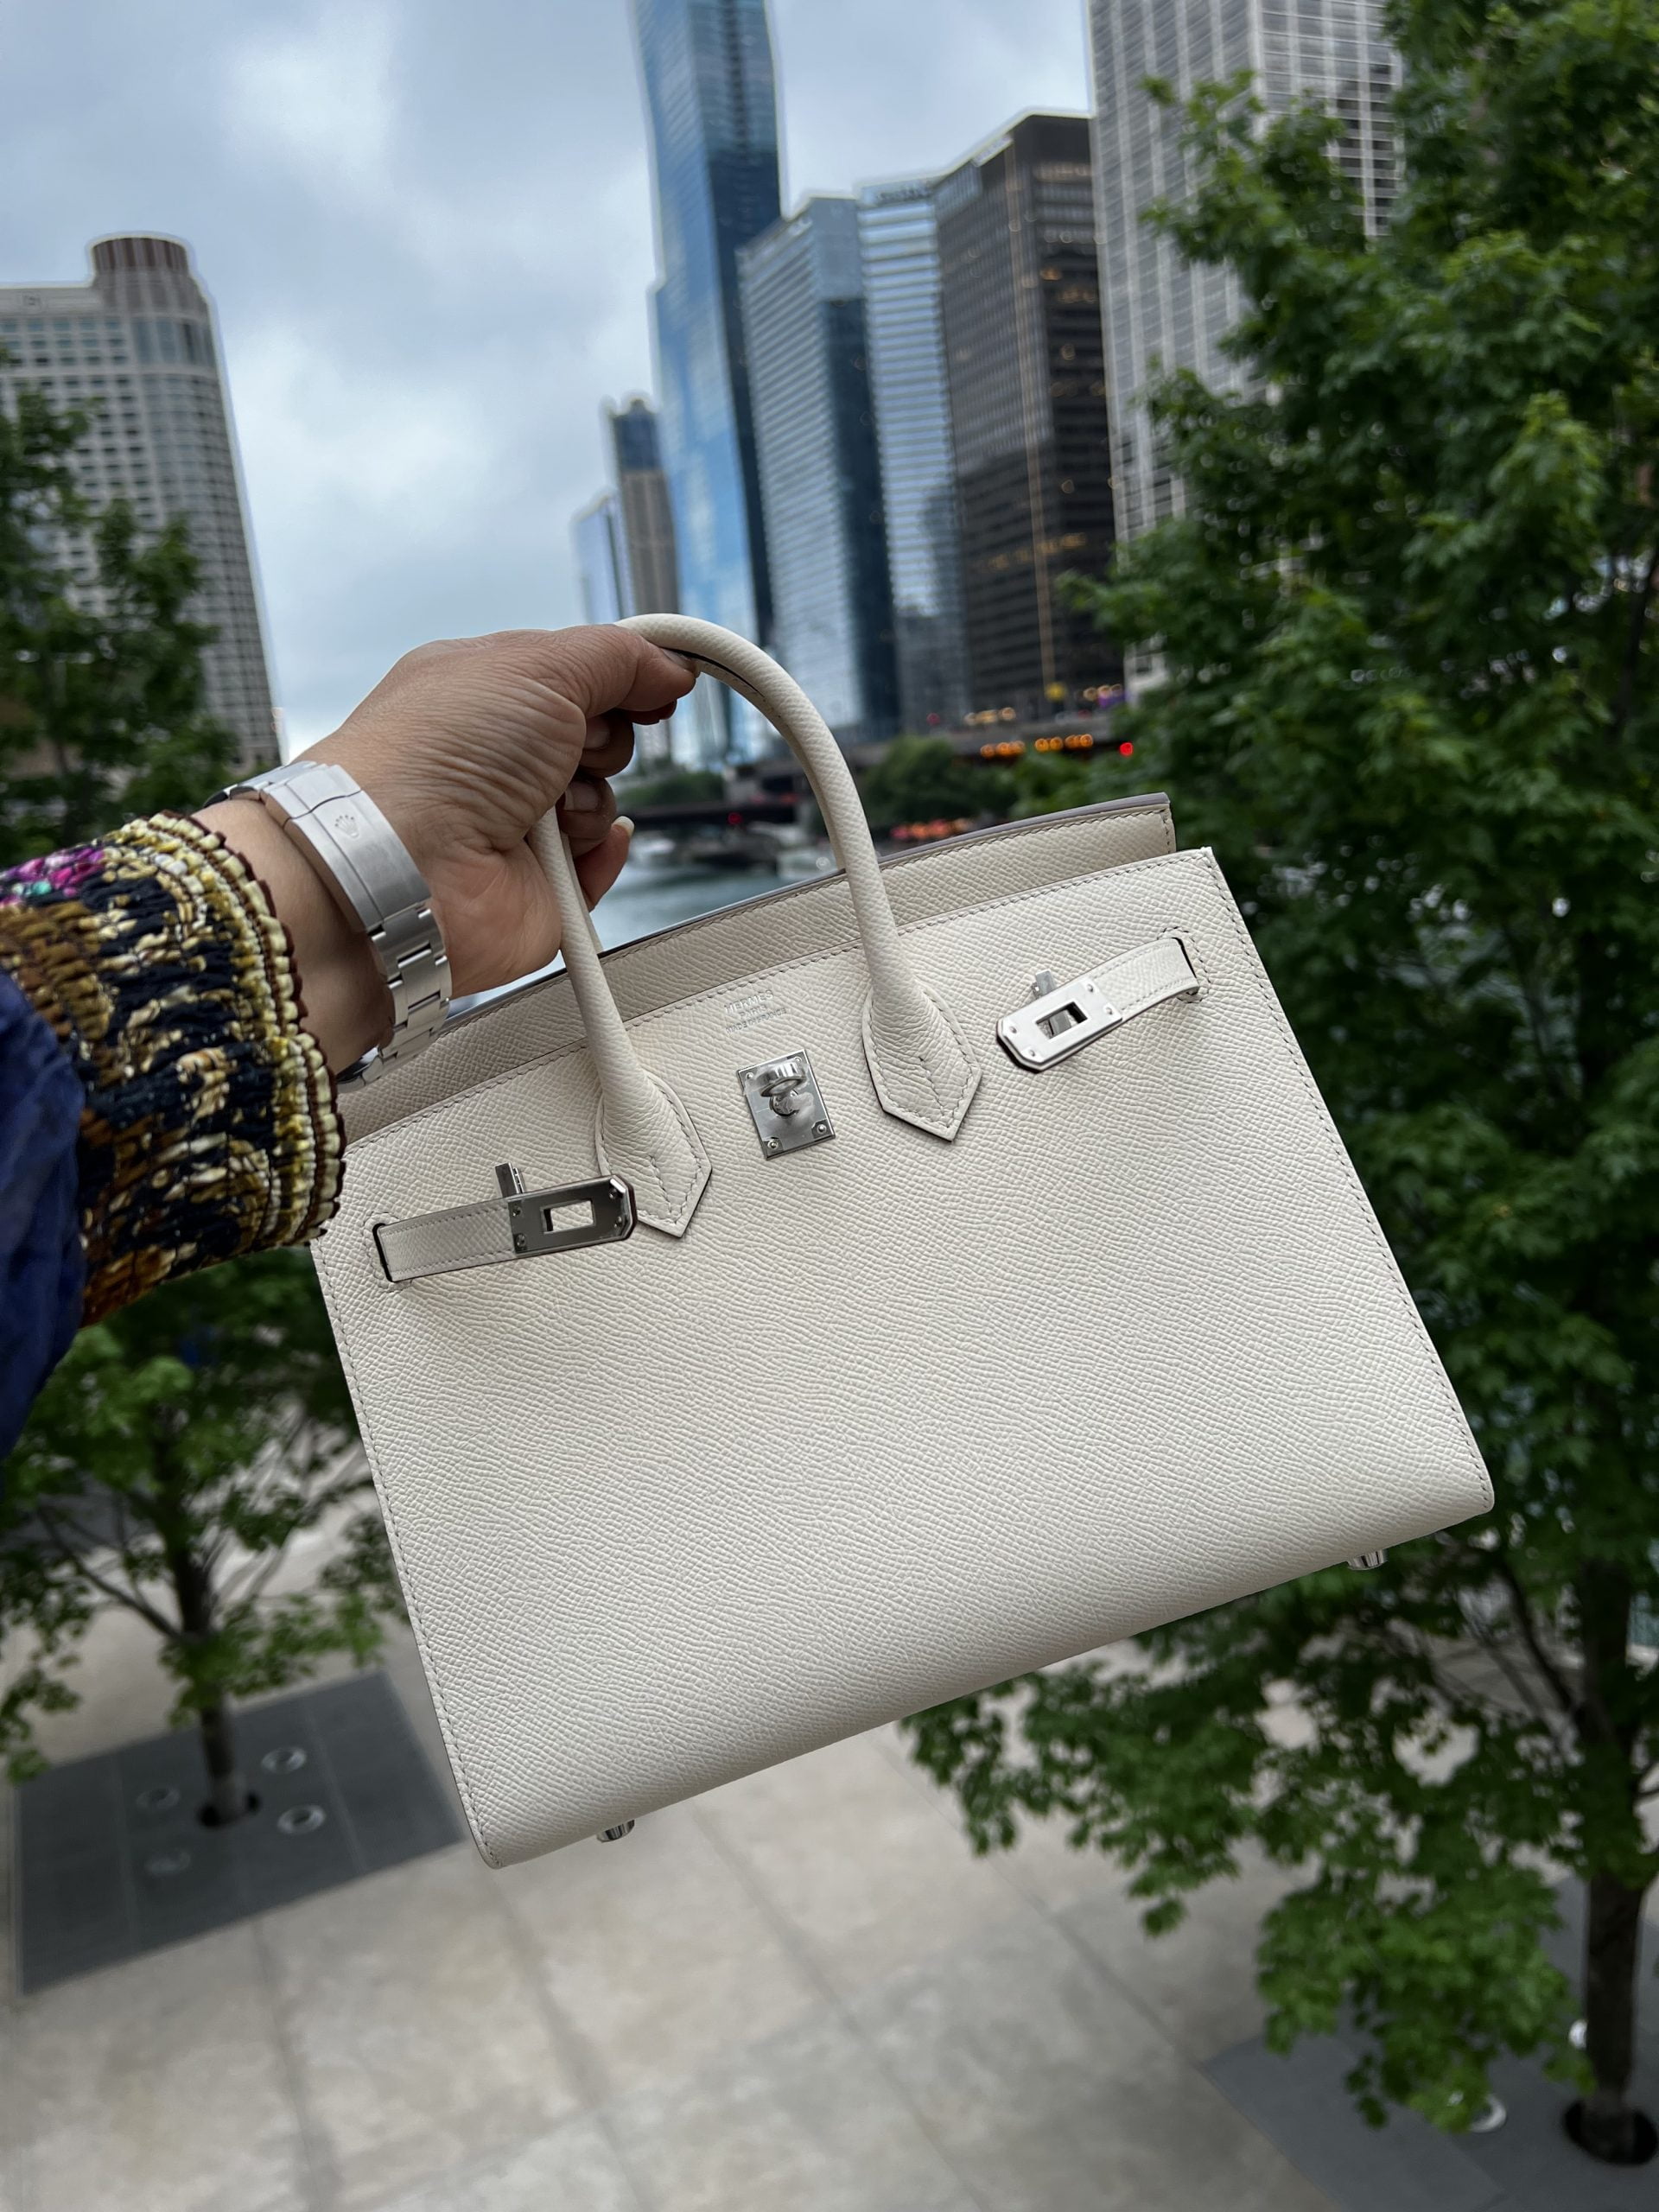 The stunning blue hue of her Birkin against the summer white